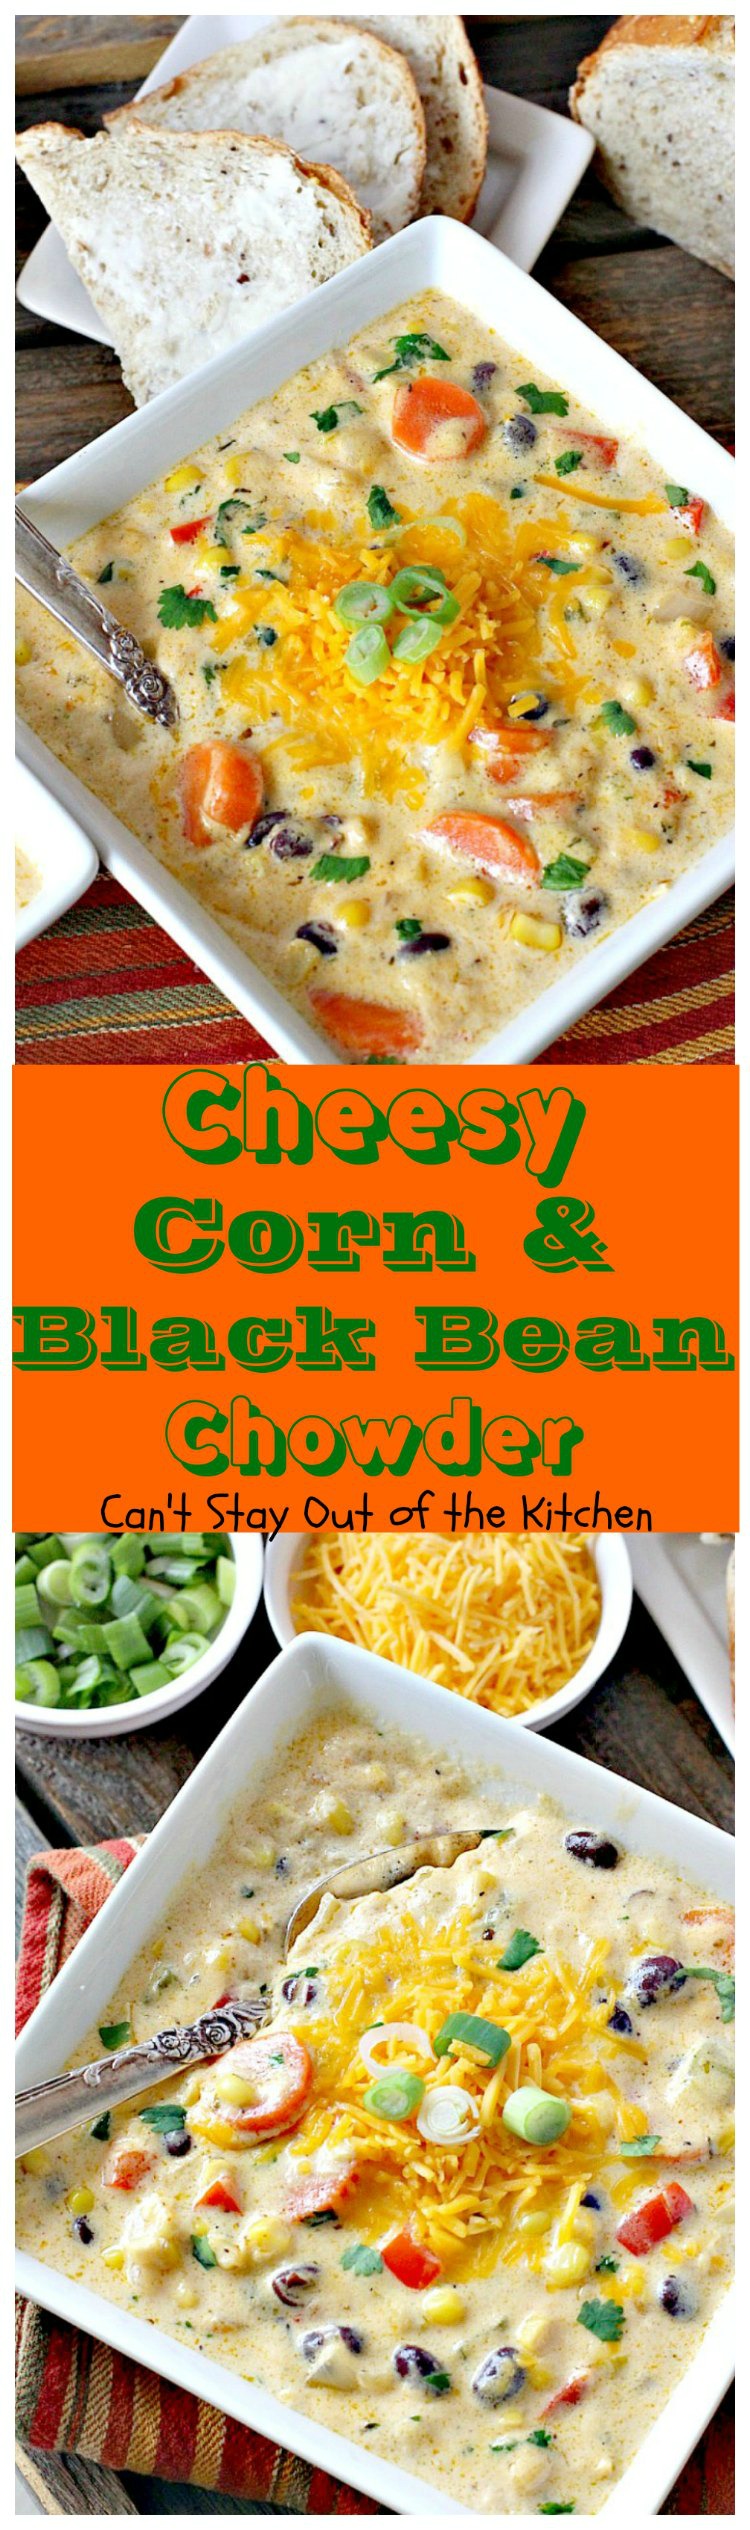 Cheesy Corn and Black Bean Chowder | Can't Stay Out of the Kitchen